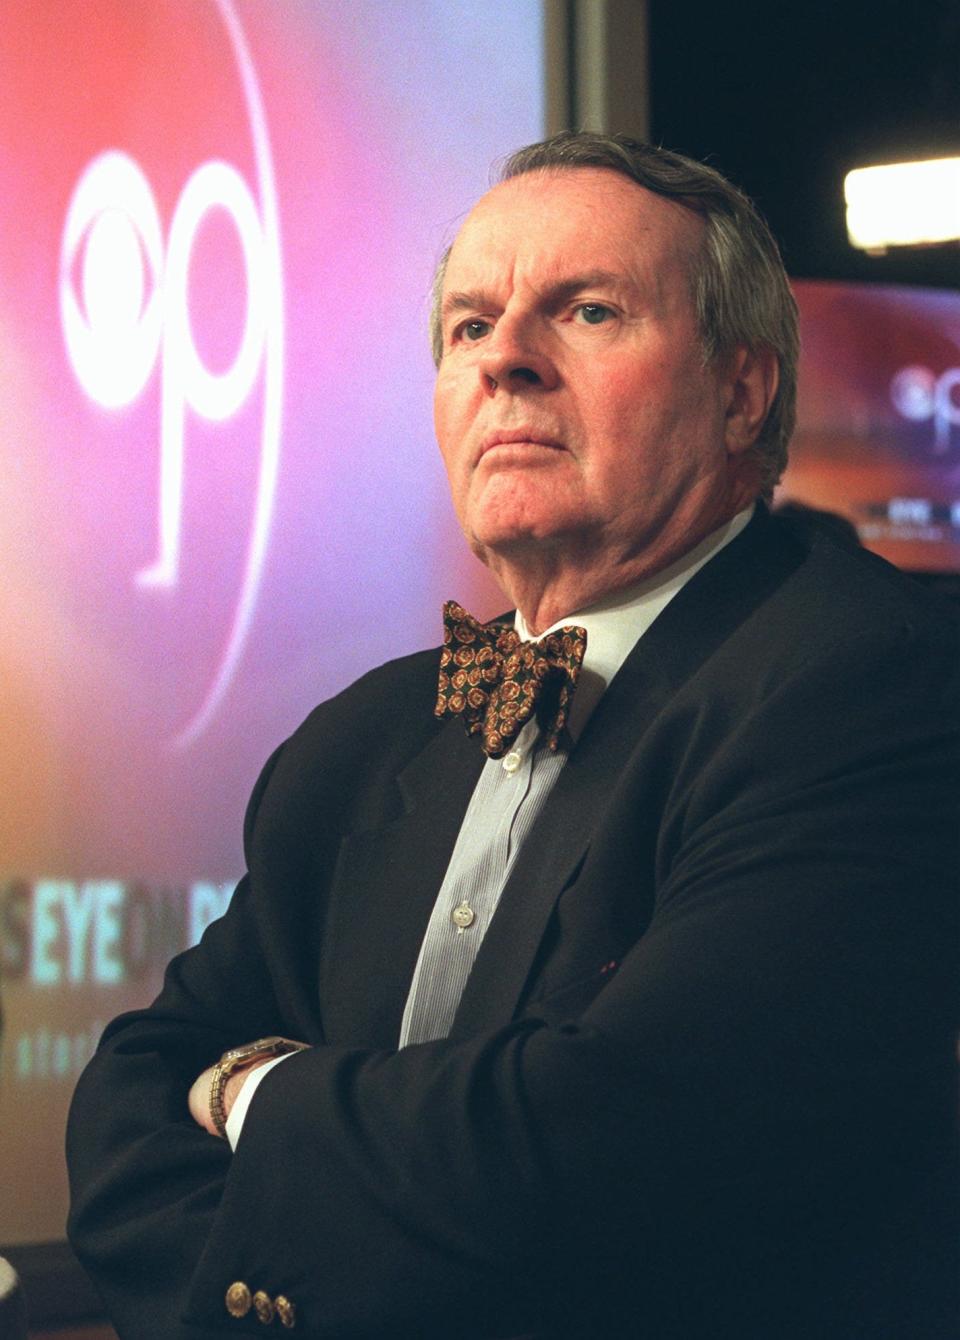 Charles Osgood anchored "CBS Sunday Morning" from 1994 until 2016.